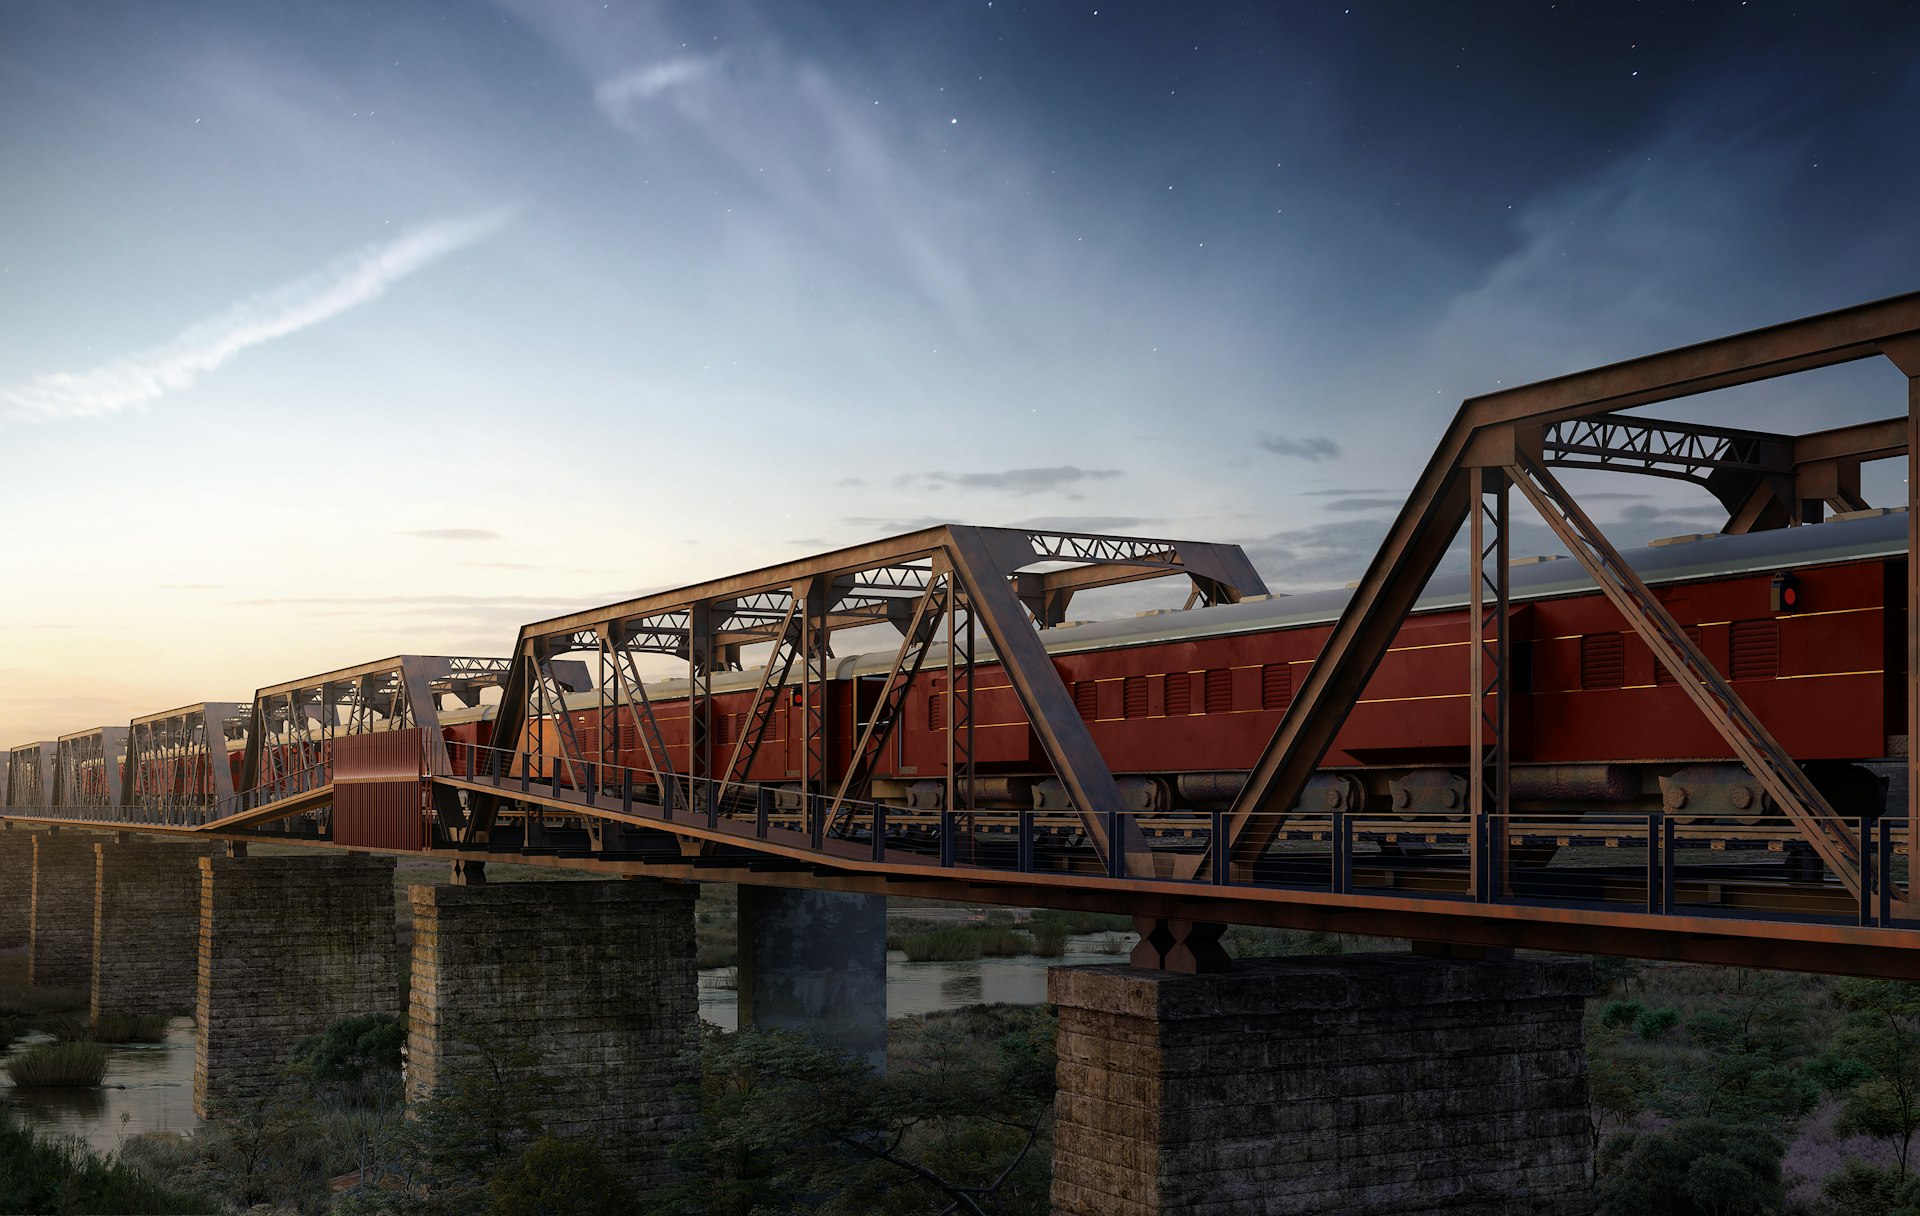 An artist's rendering of a luxury train-hotel on a bridge over Kruger National Park